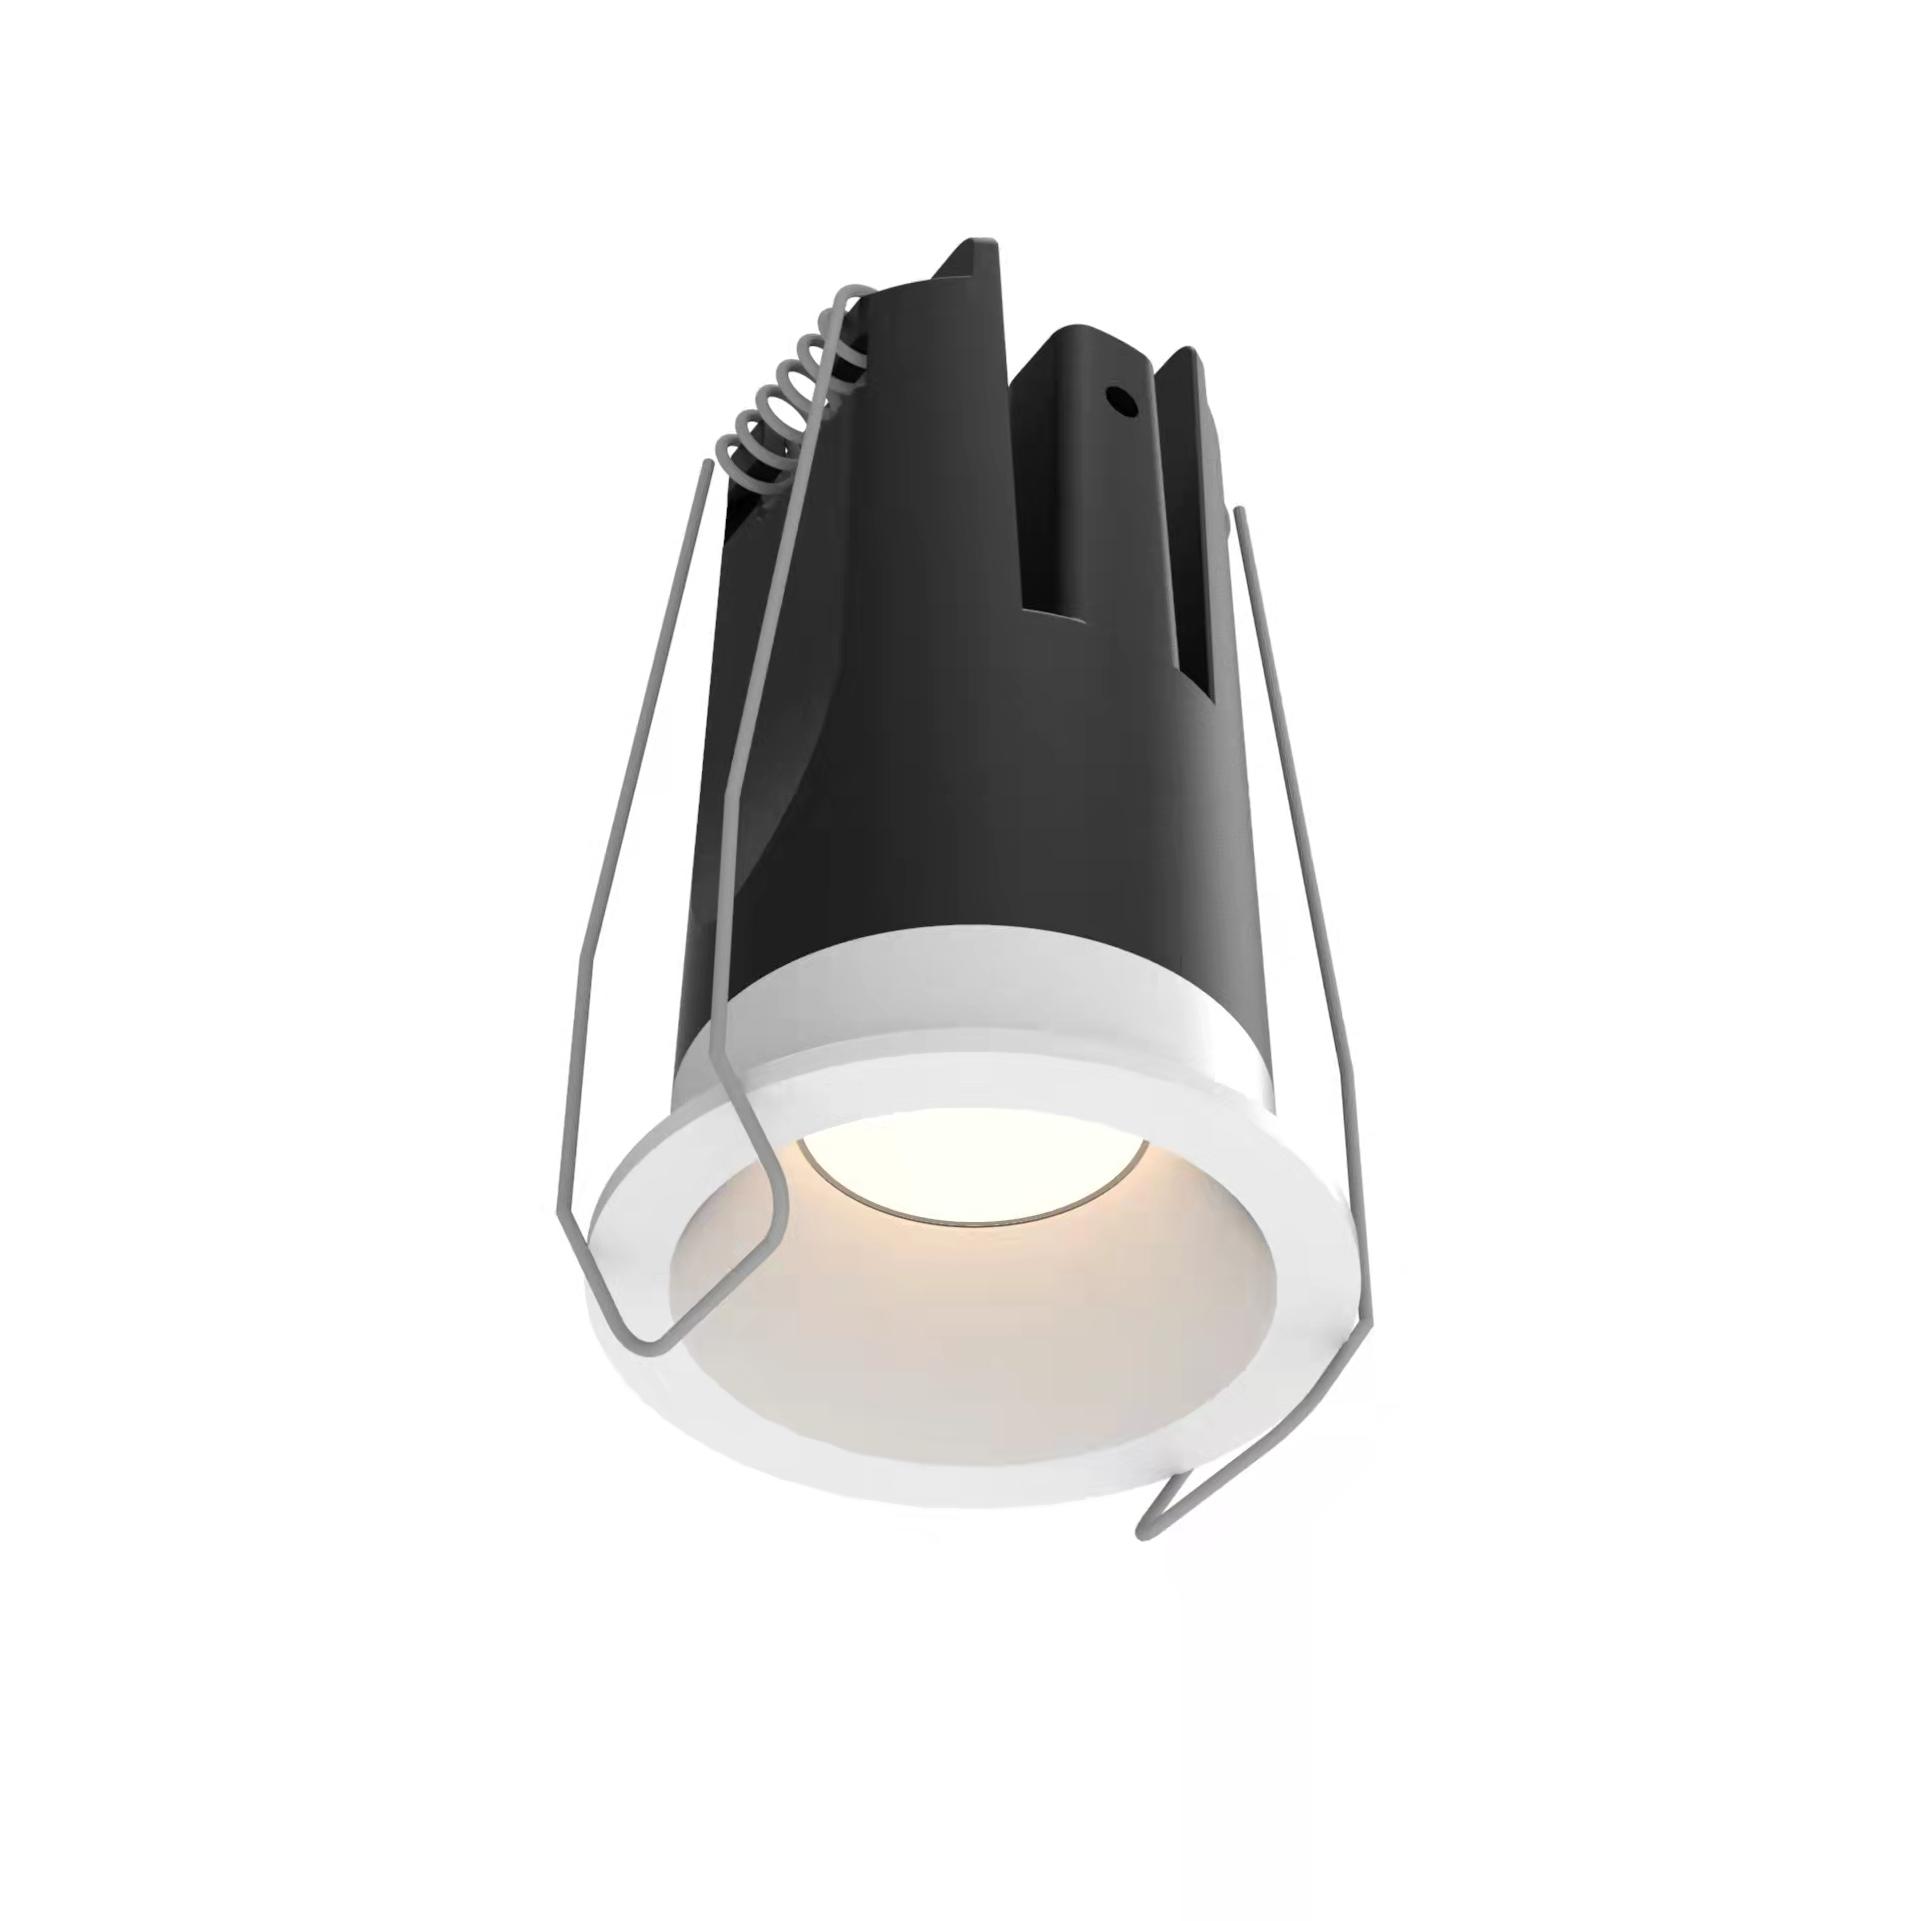 Trimless Downlights Led Compact Size Cut Hole 35mm For Commerical Lighitng